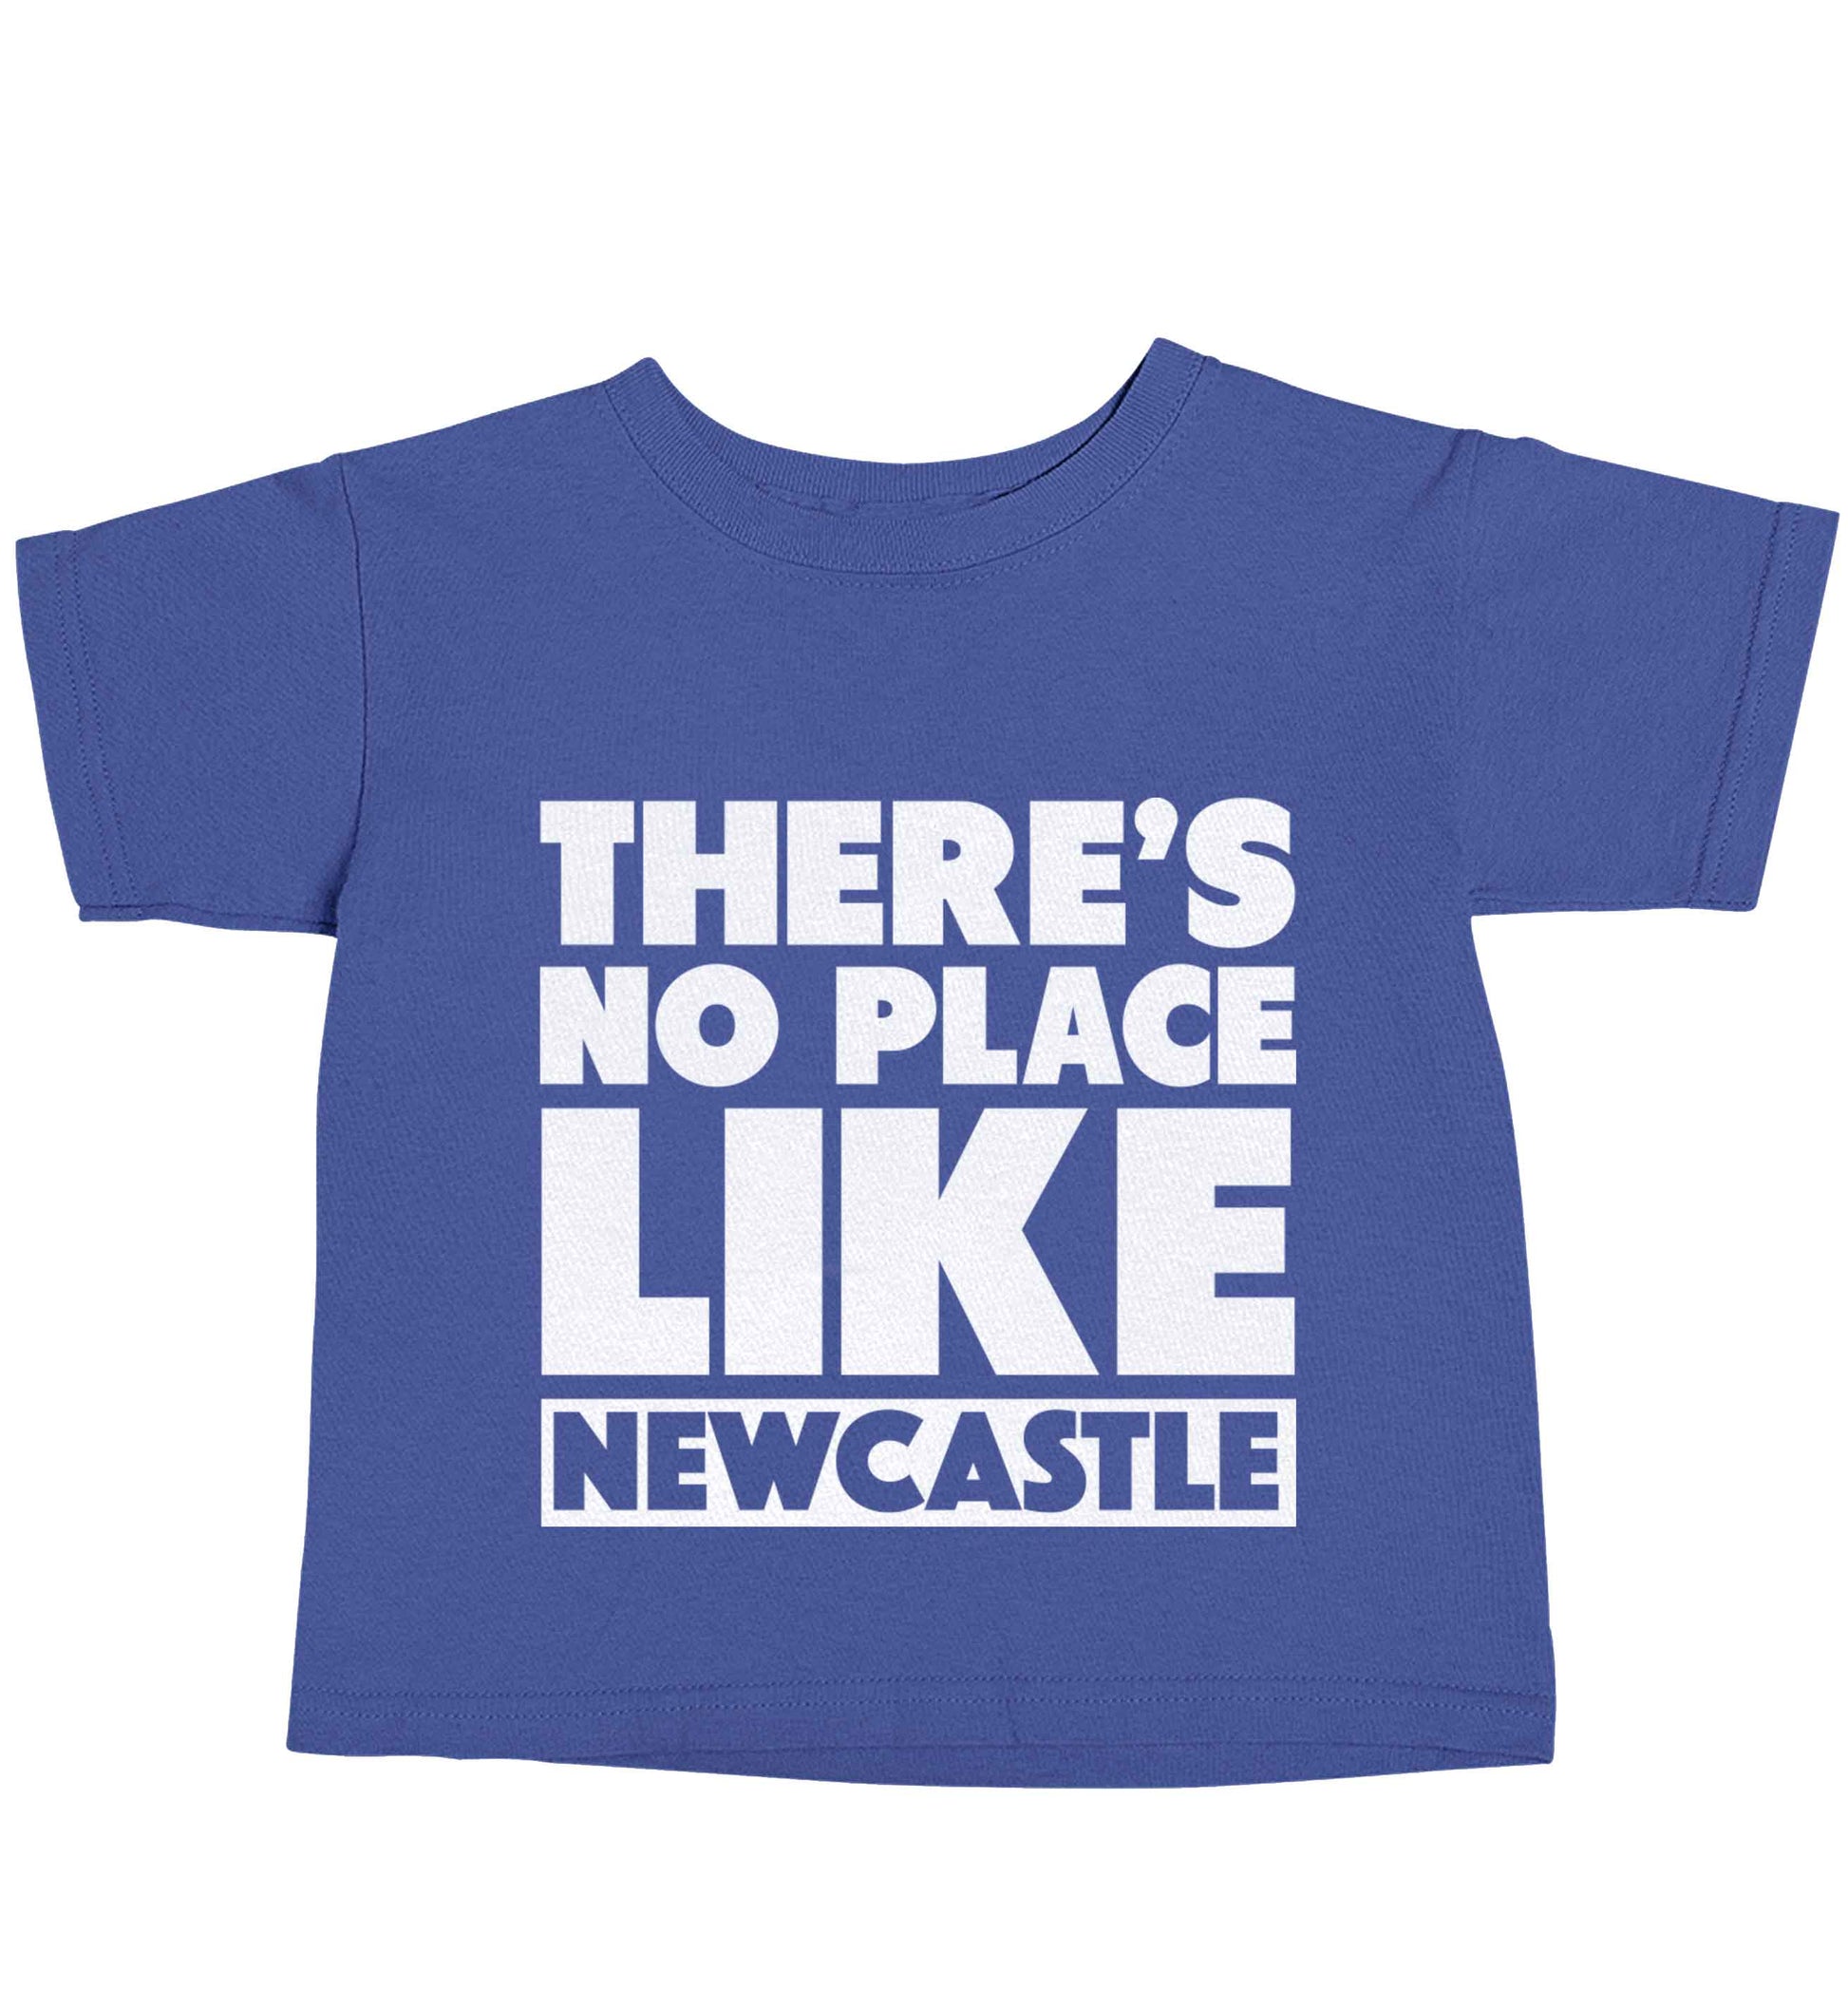 There's no place like Newcastle blue baby toddler Tshirt 2 Years